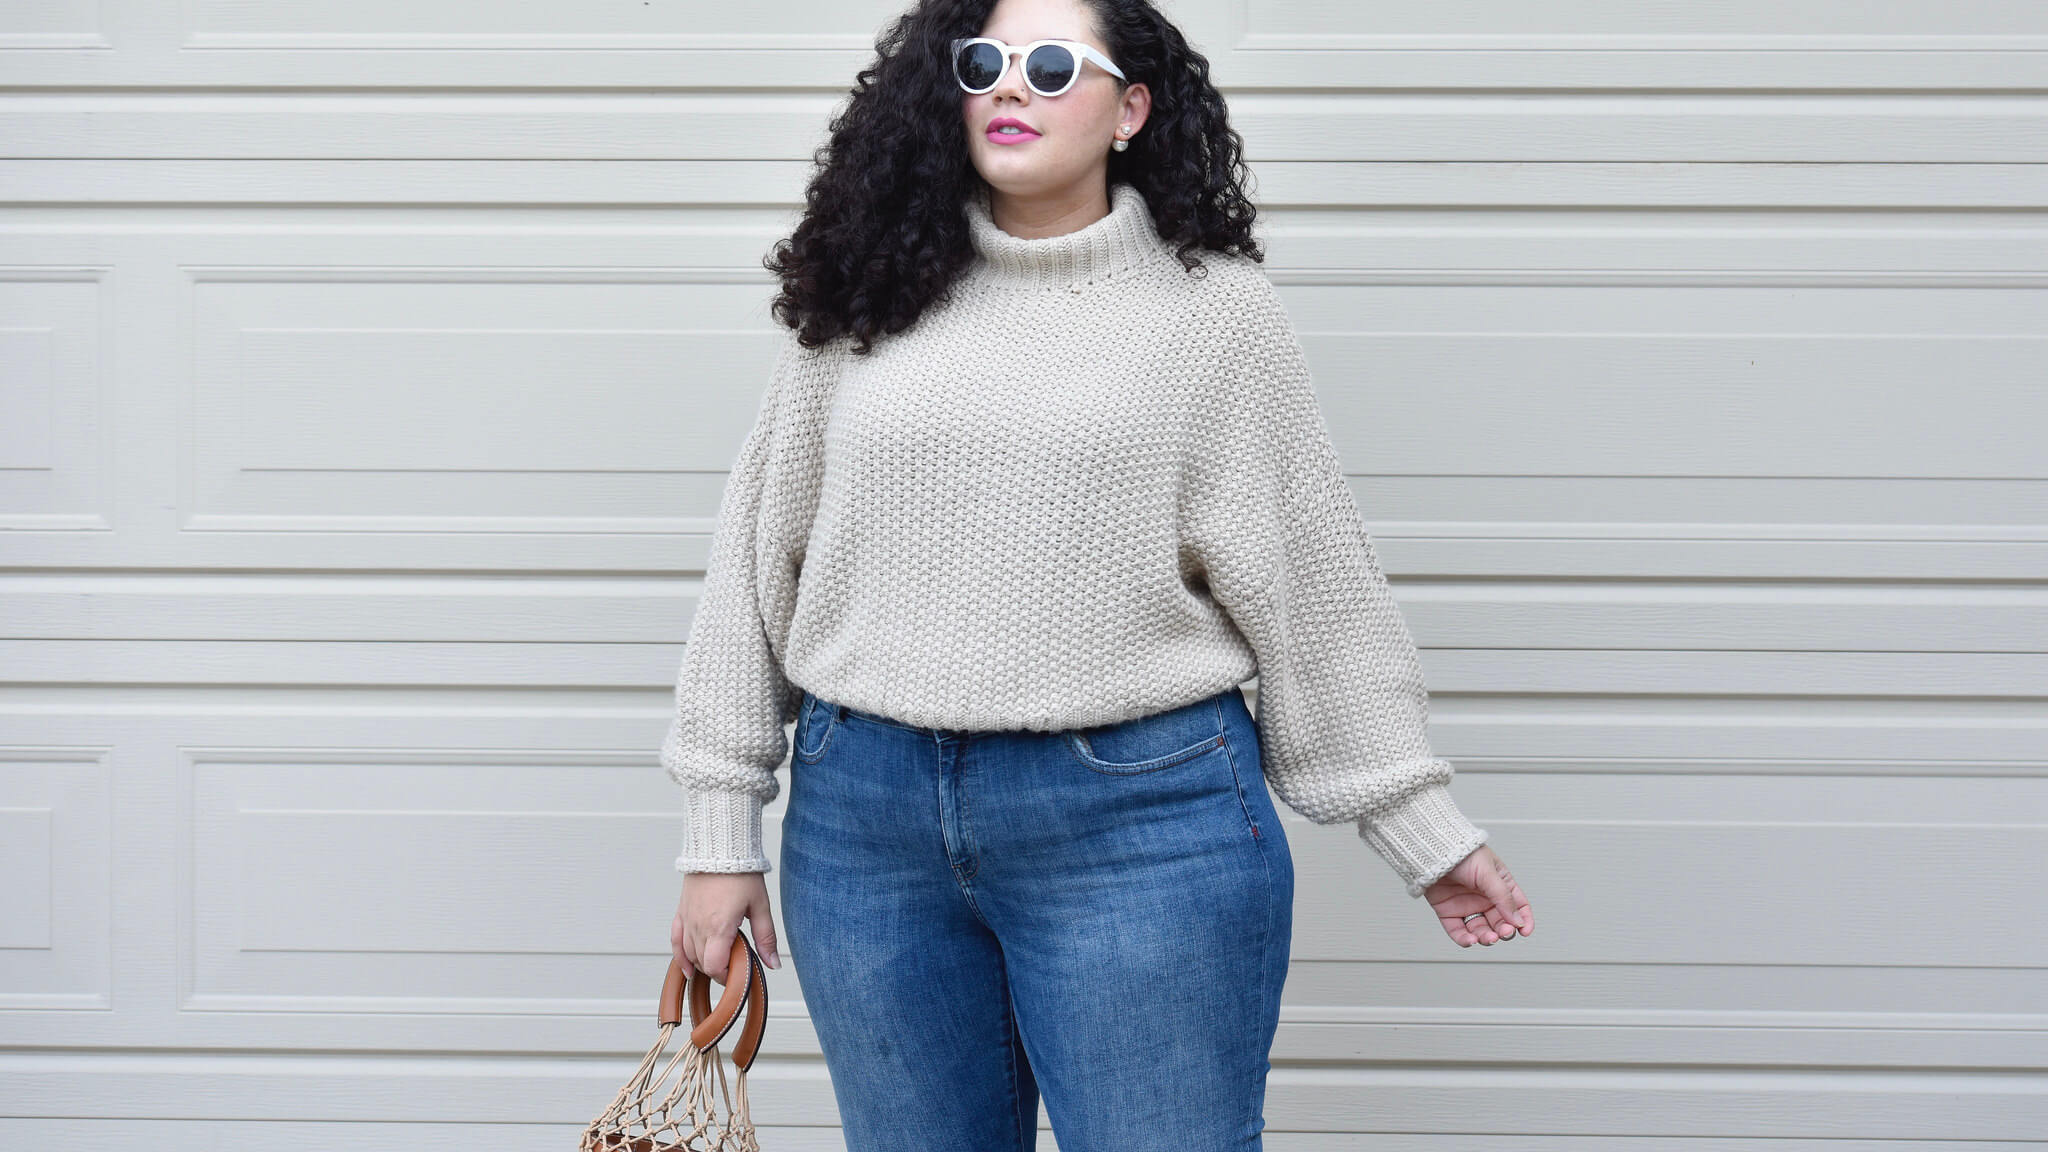 A Comfy outfit that's still stylish | Girl With Curves